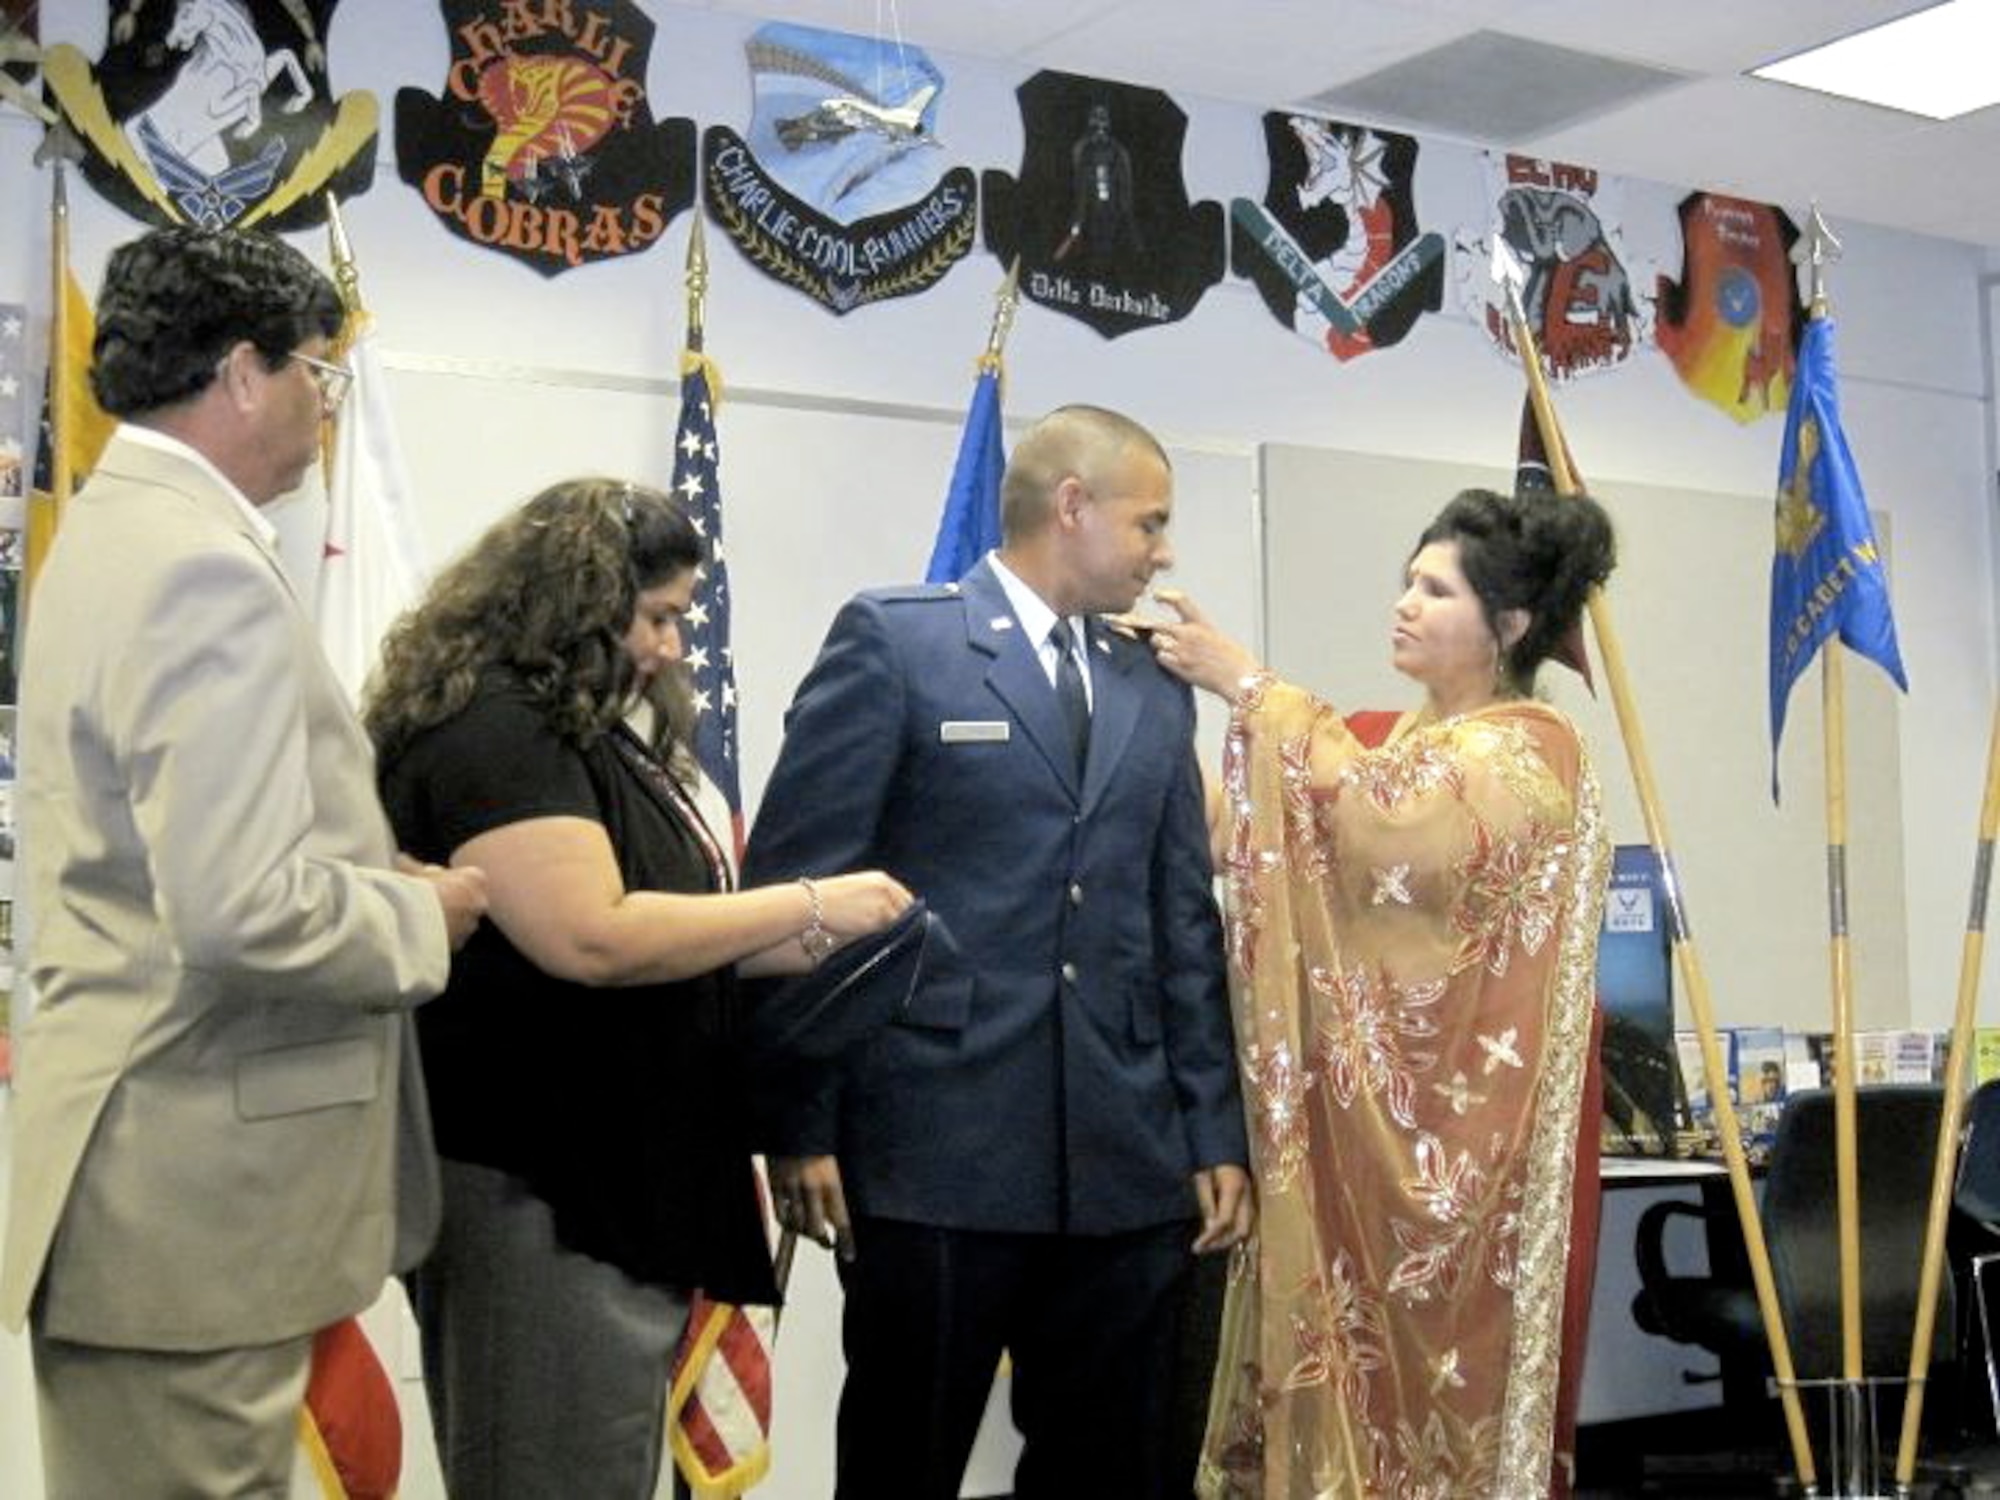 Members of 2nd Lt. Jason Ram's family pin on his second lieutenant bars at his commissioning at Loyola Marymount University, August 26, 2011.  Lieutenant Ram is currently stationed with the 479th Flying Training Group at Naval Air Station Pensacola, Fla.  The 479th FTG is the 12th Flying Training Wing's geographically separated unit and conducts Combat Systems Officer Training for the U.S. Air Force.  (Courtesy Photo)